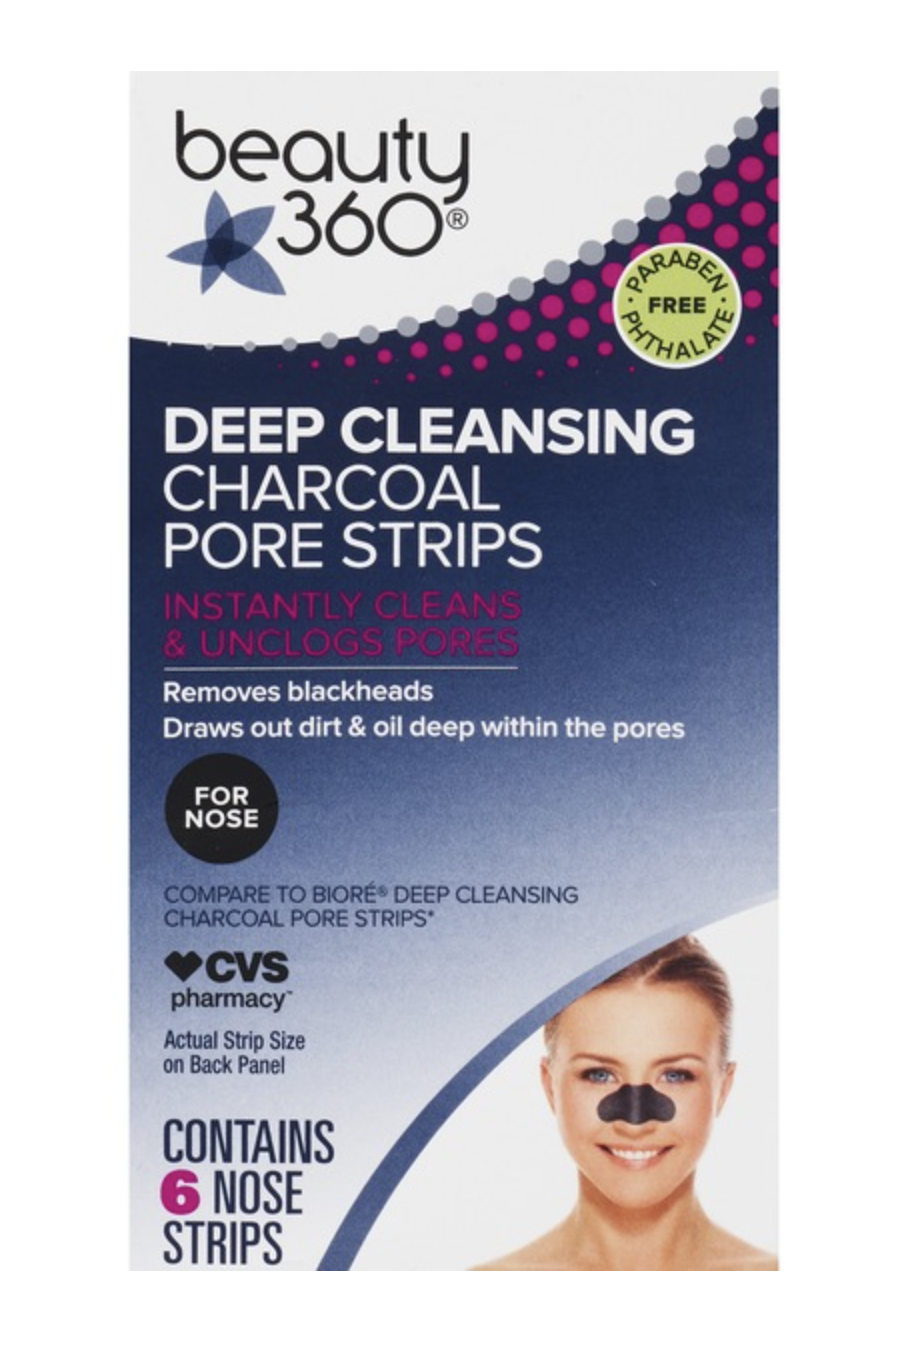 Charcoal pore strips to remove blackheads and draw out dirt and oil deep within the pores